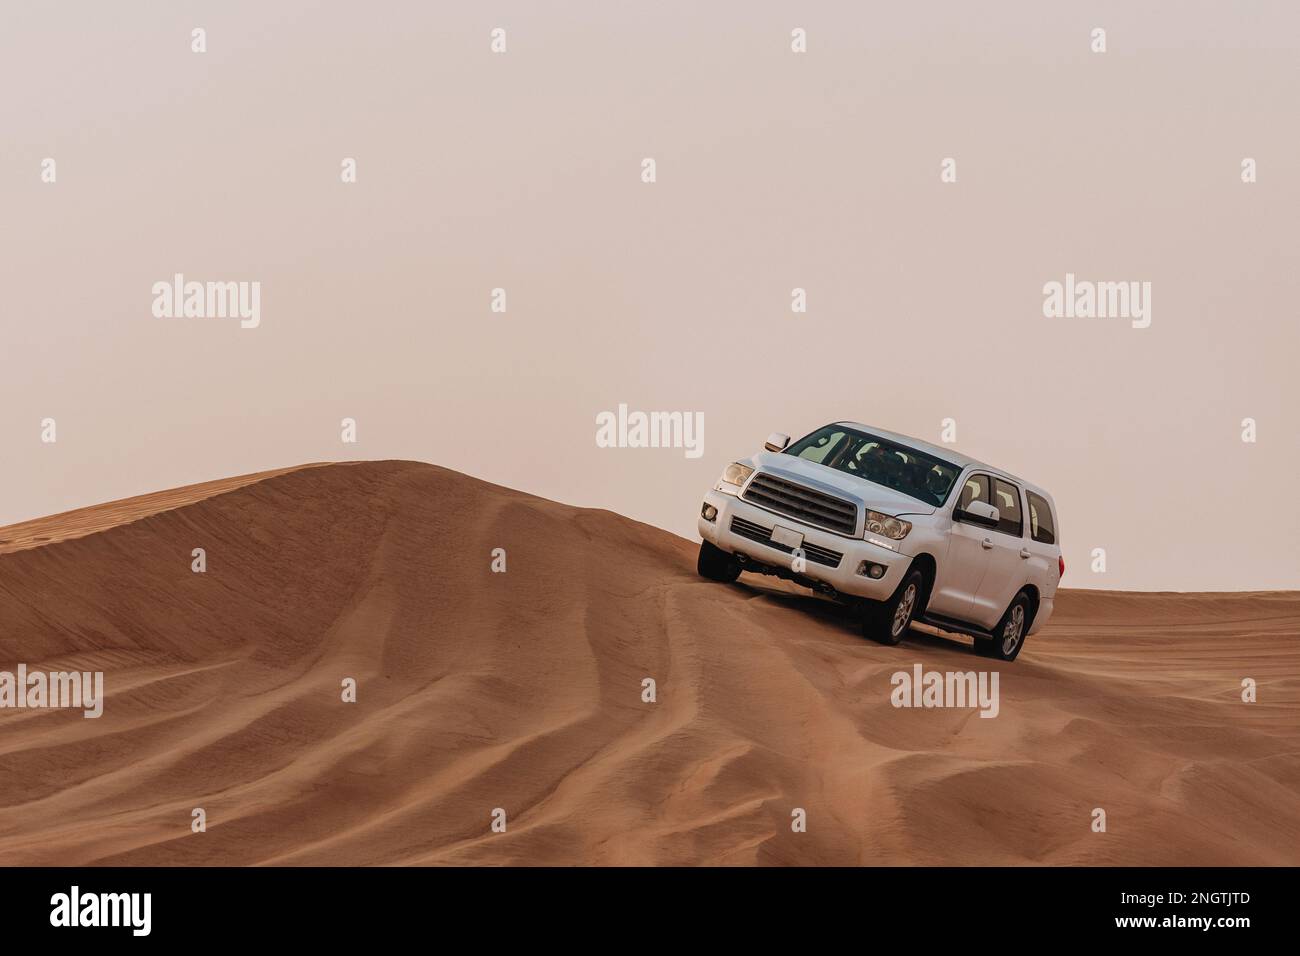 Dubai, United Arab Emirates - 01, July 2021 : The car ride at Arabian Desert over the dunes. A warm day in the desert. Stock Photo